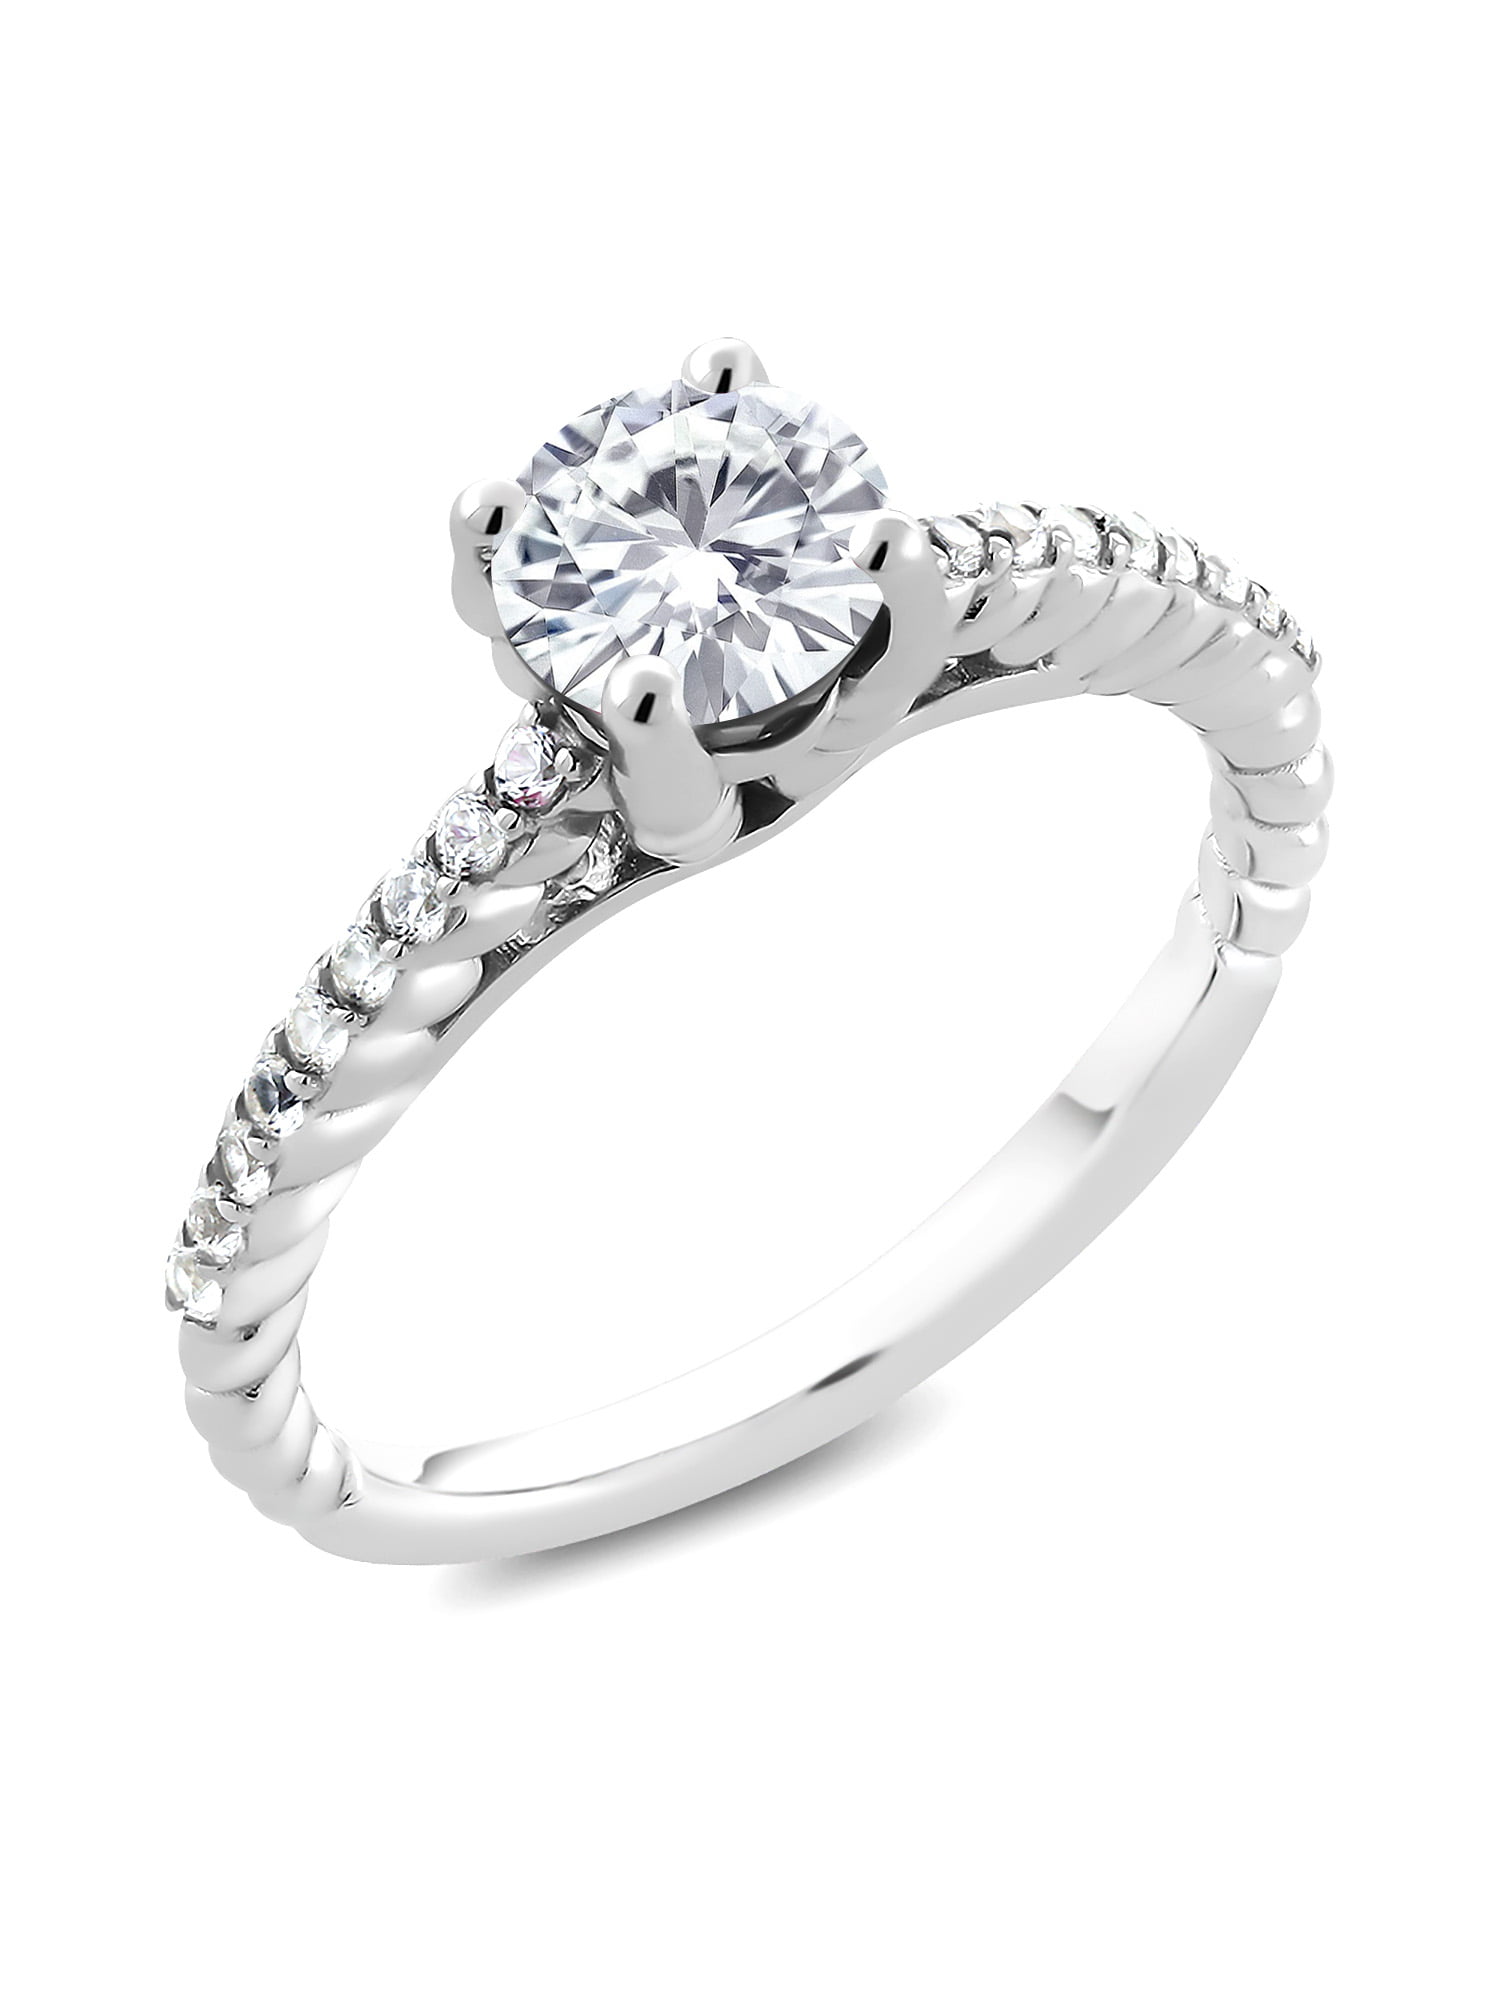 Gem Stone King - Gem Stone King 925 Sterling Silver Solitaire w/ Accent ...